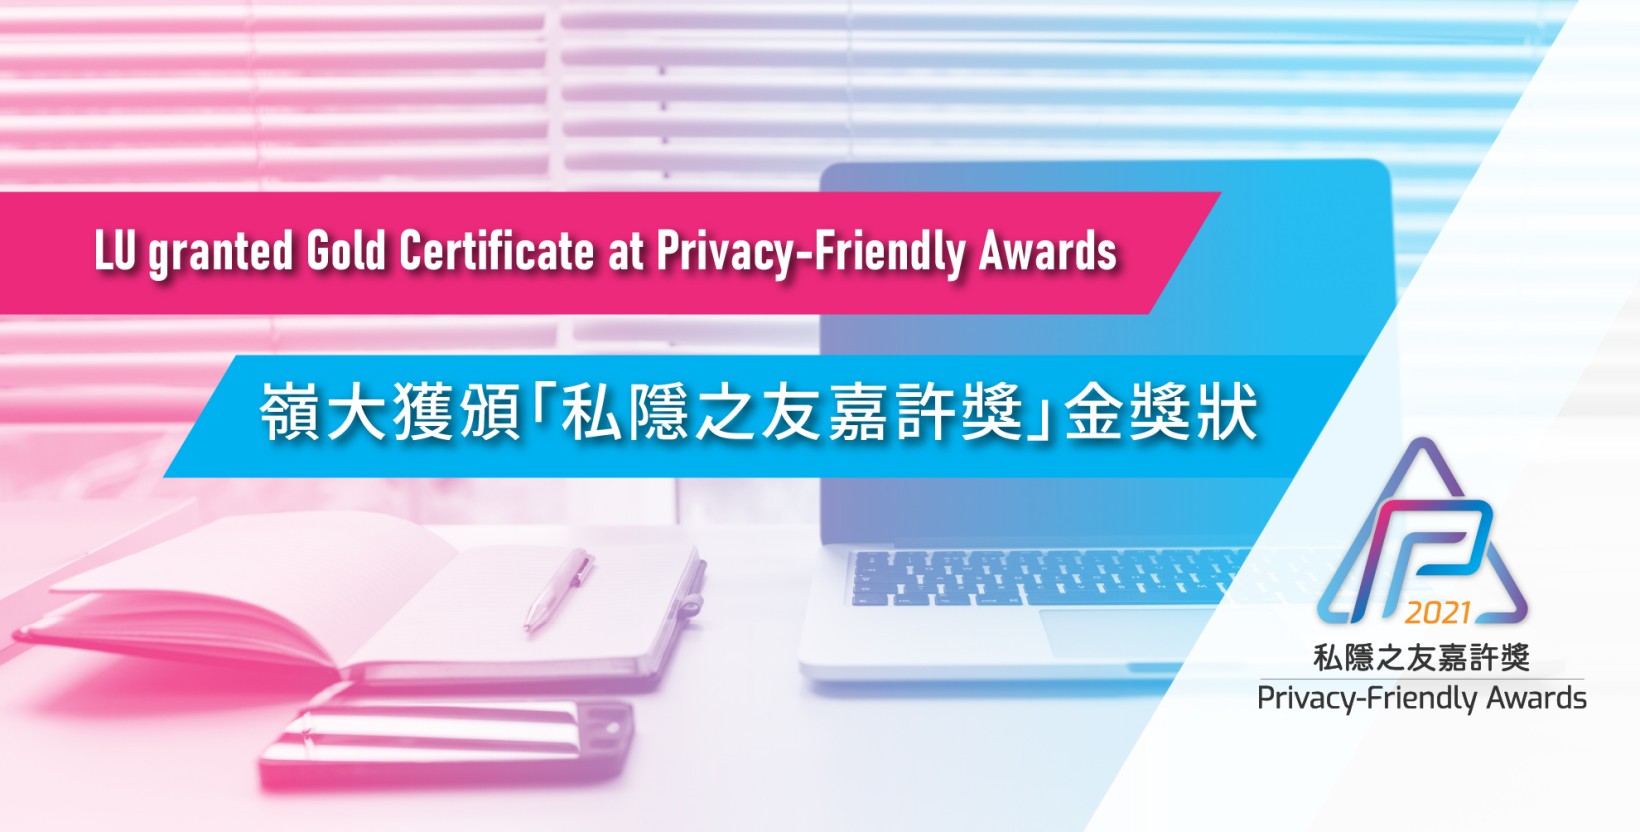 LU granted Gold Certificate at Privacy-Friendly Awards